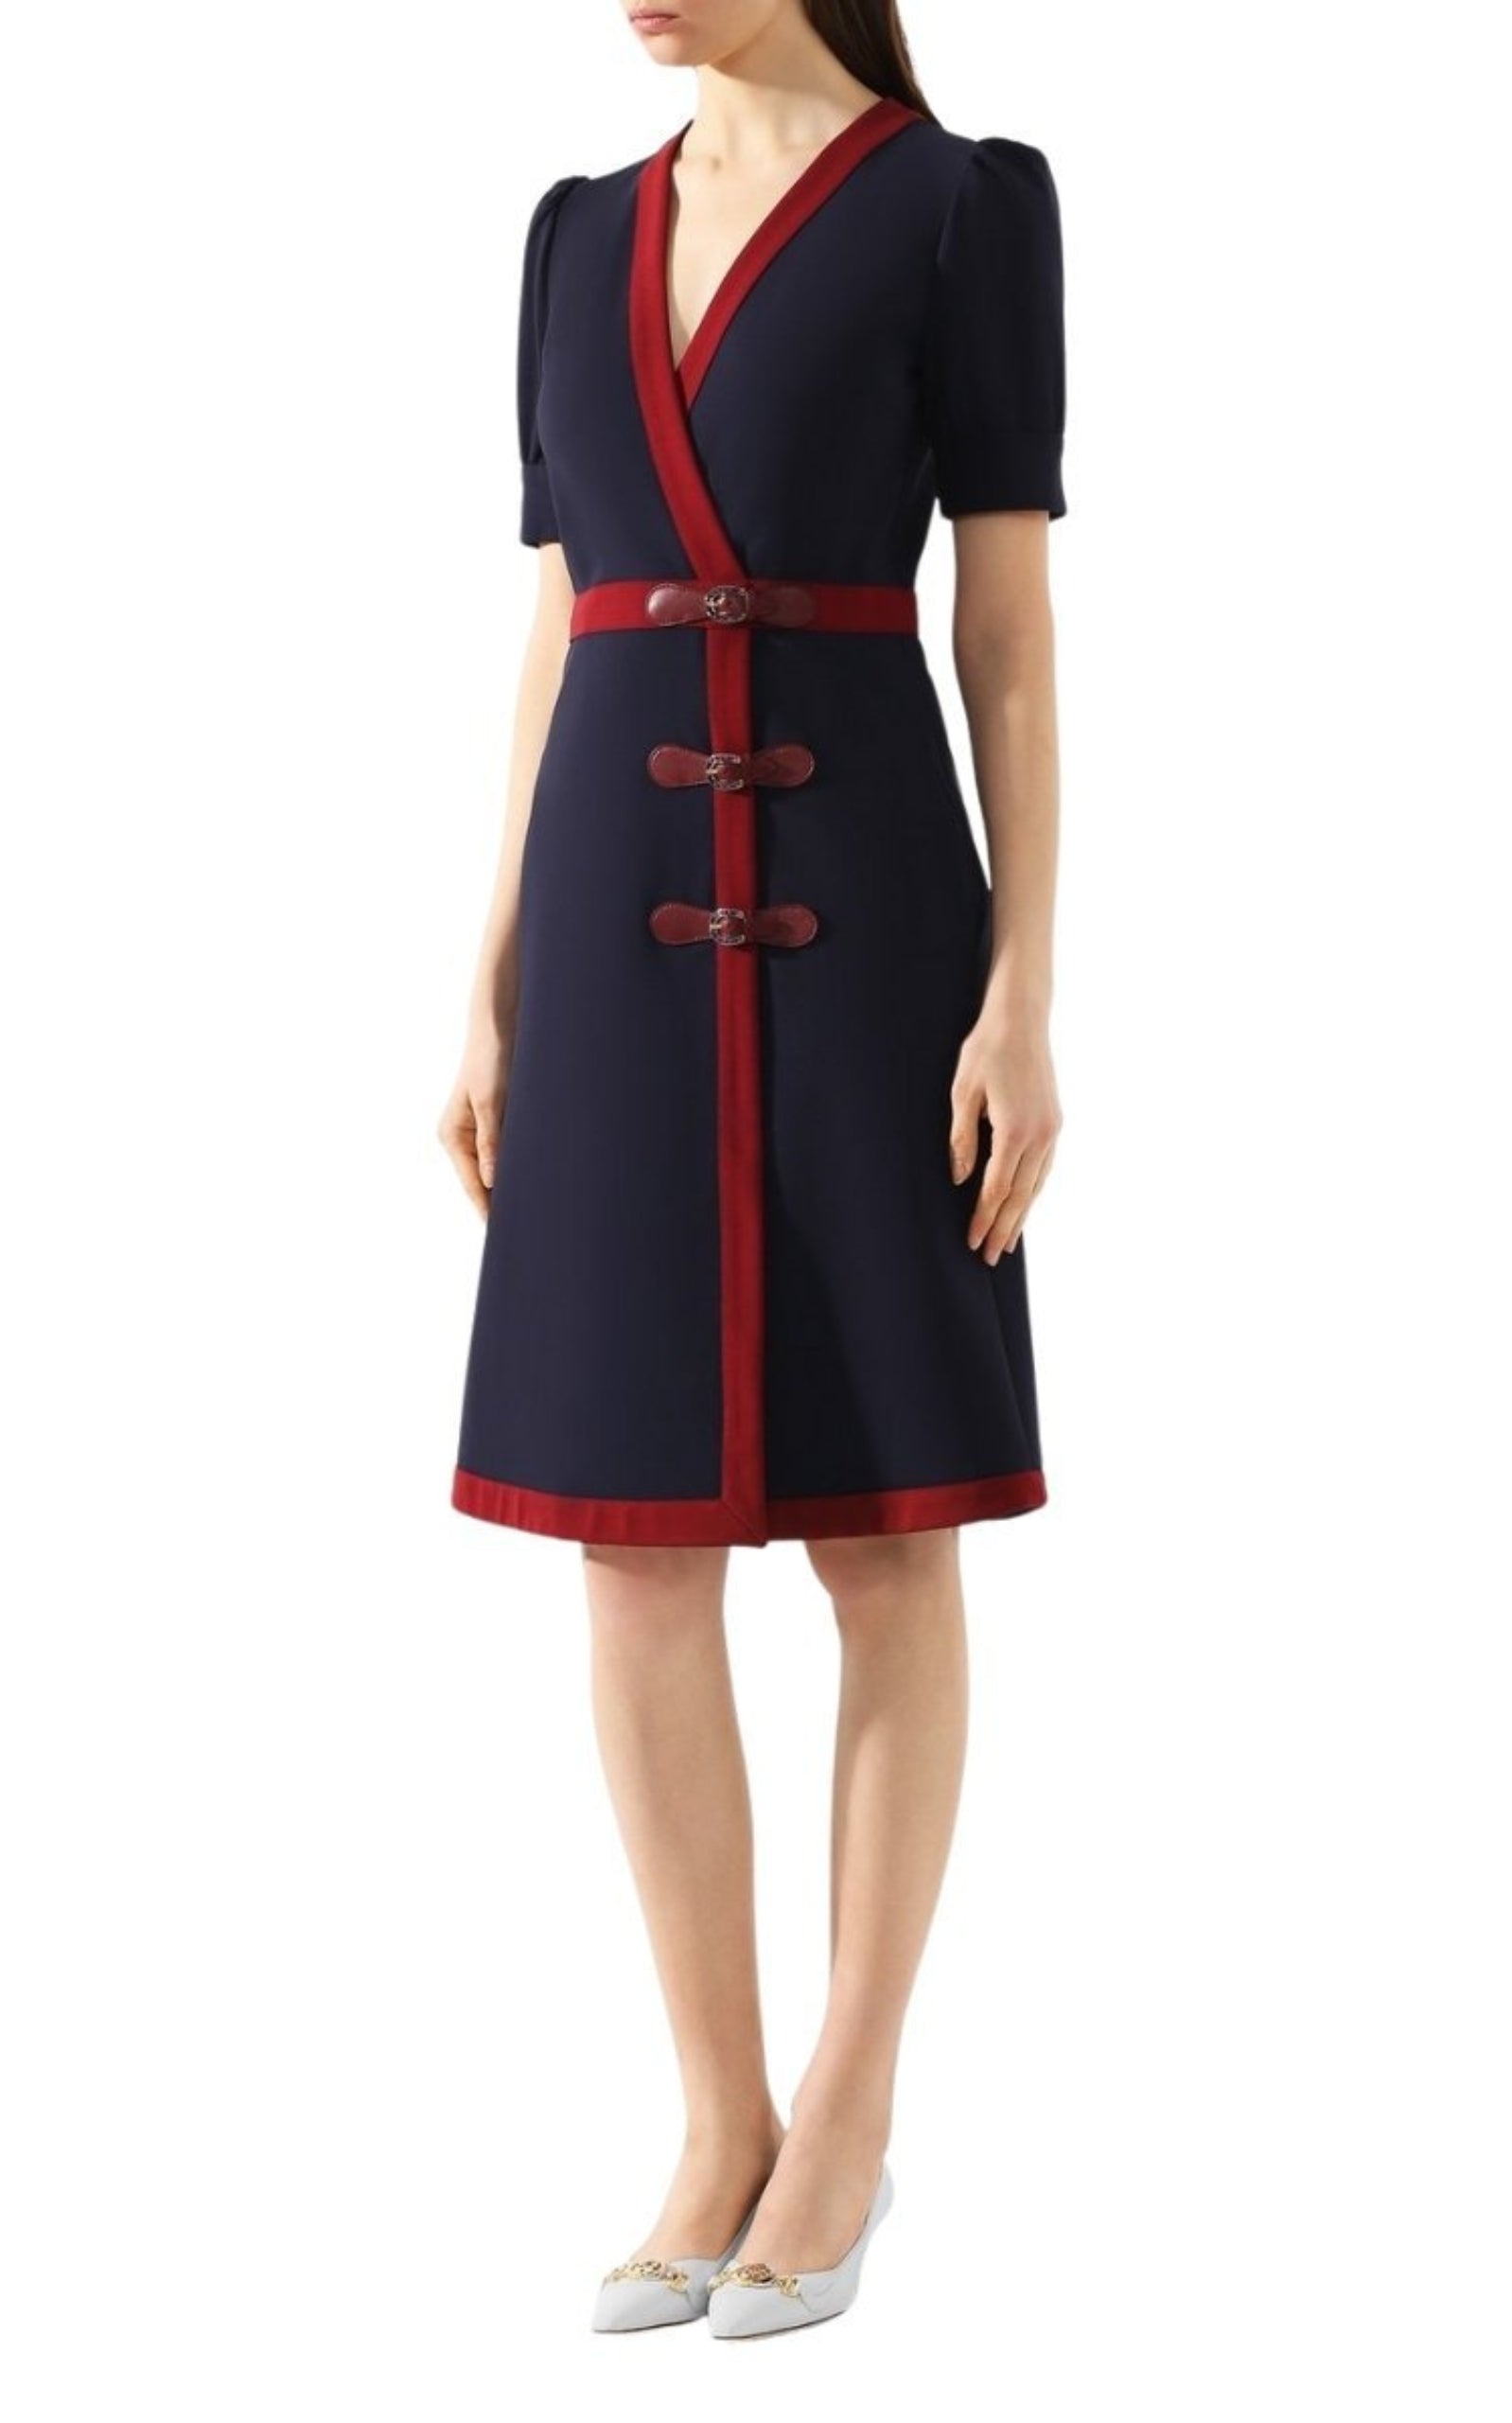  GucciFitted Navy Blue Dress - Runway Catalog